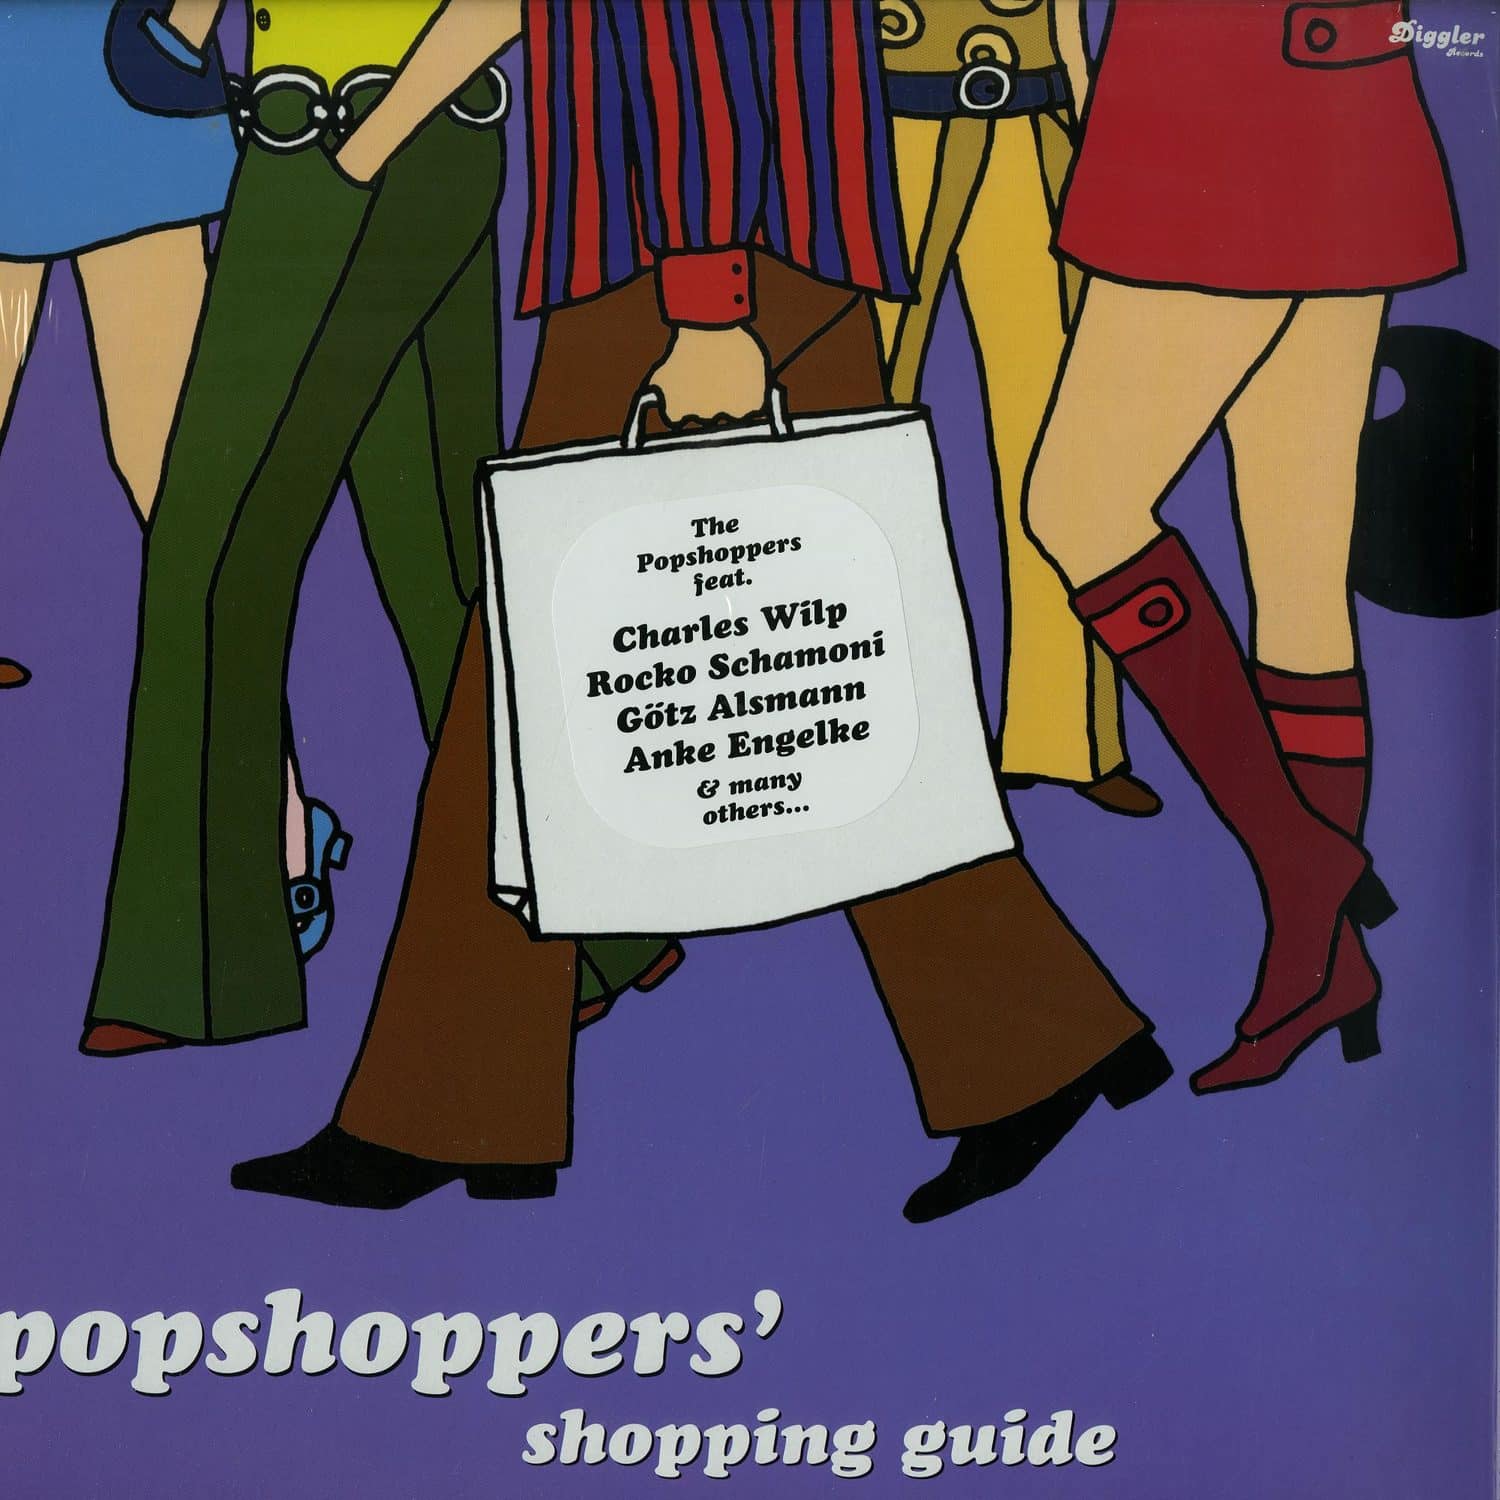 Popshoppers - POPSHOPPERS SHOPPING GUIDE 